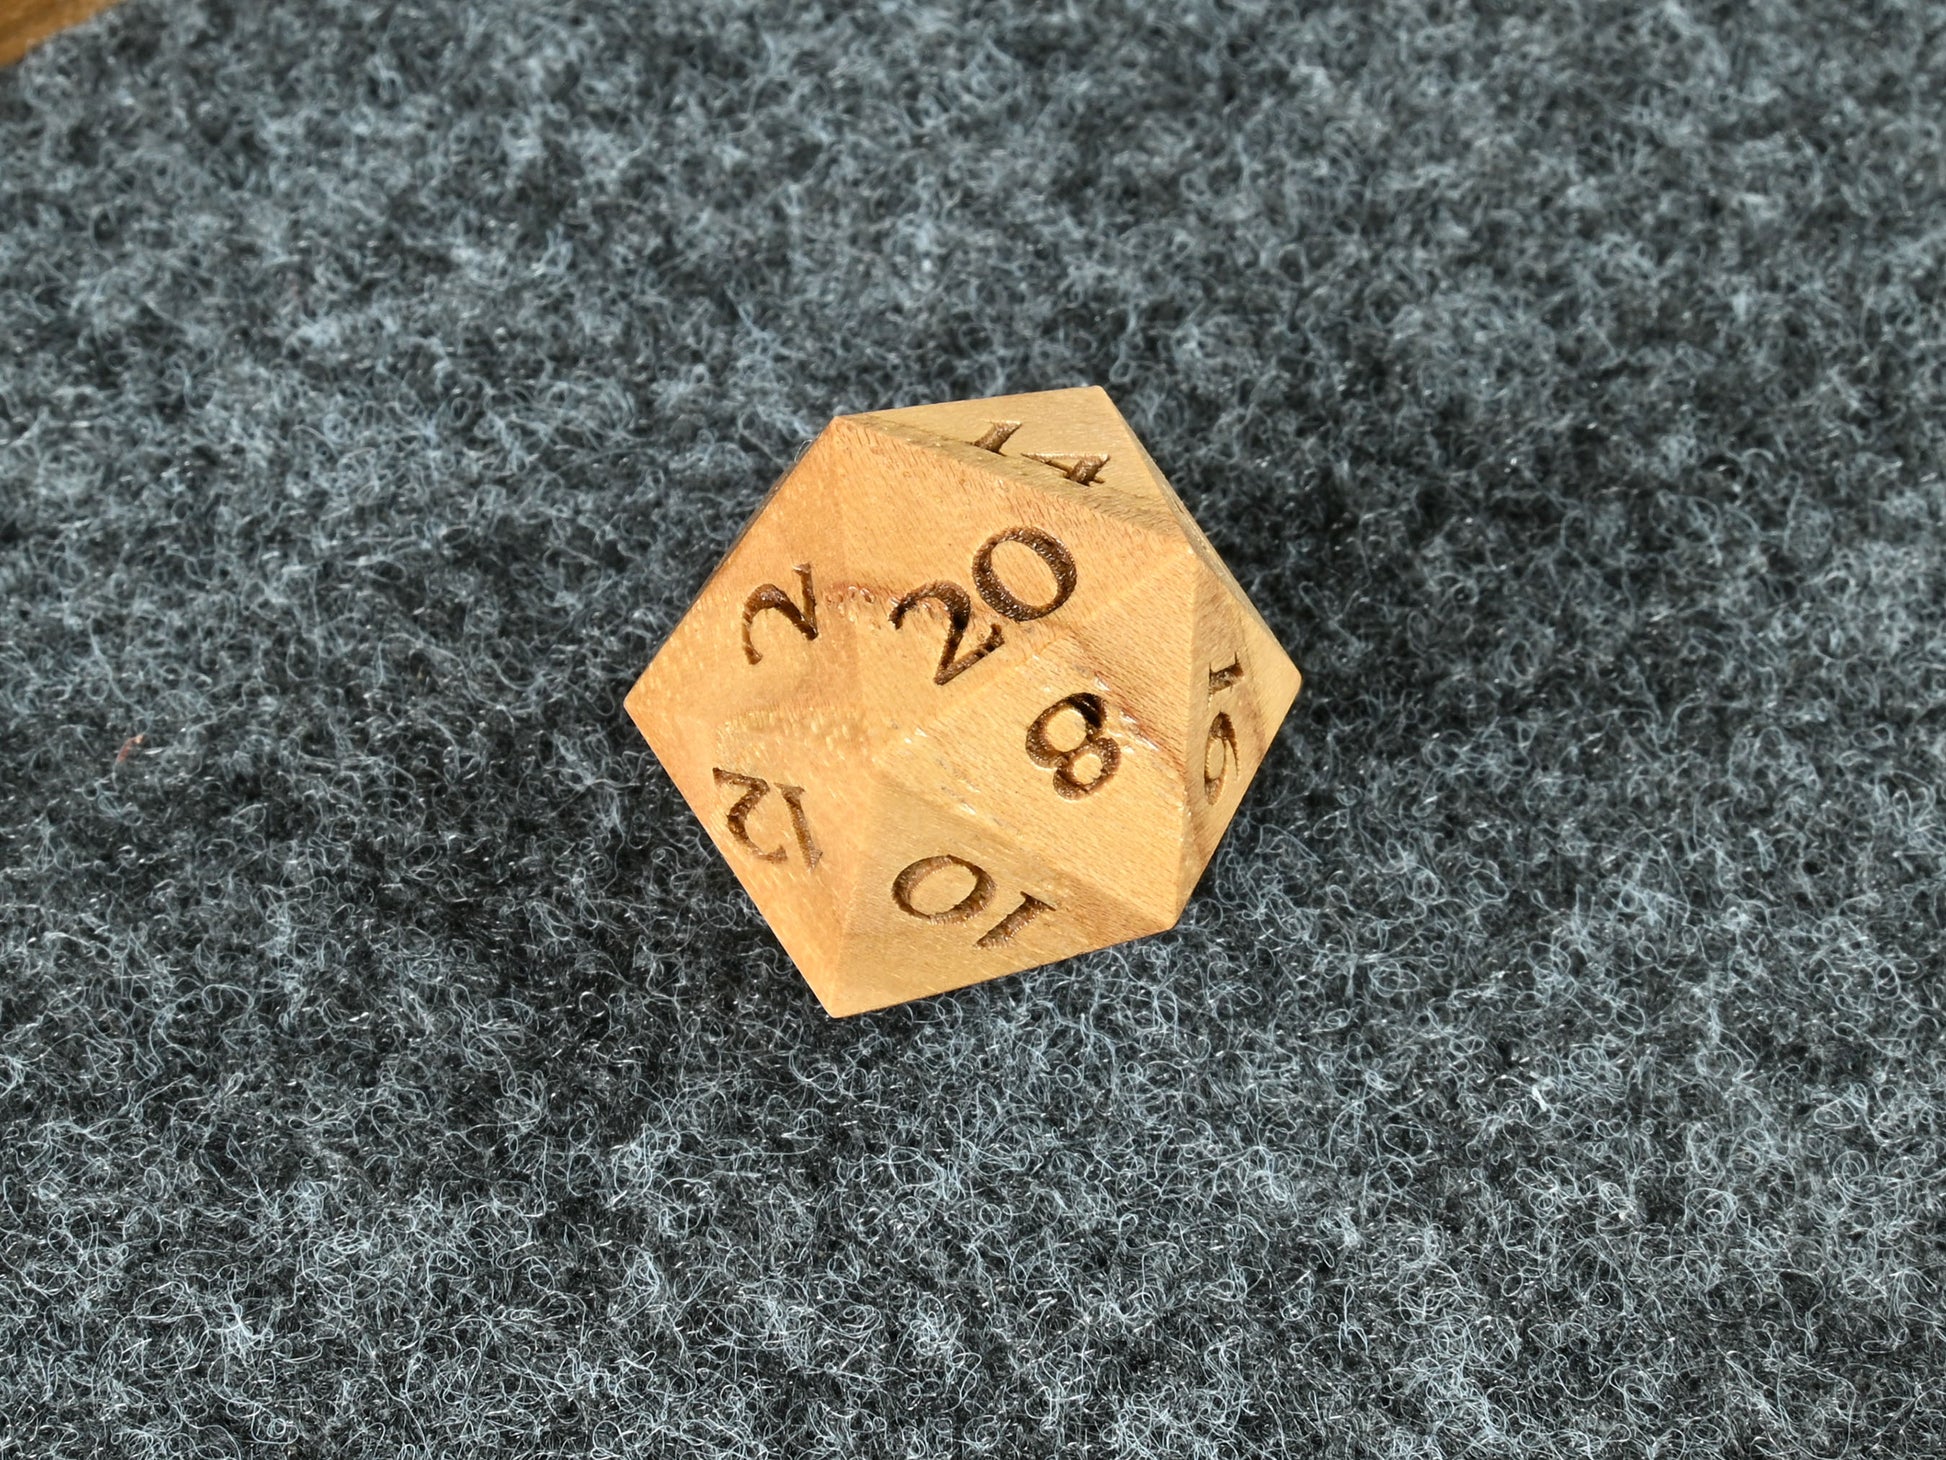 Hickory wood d20 for dnd rpg